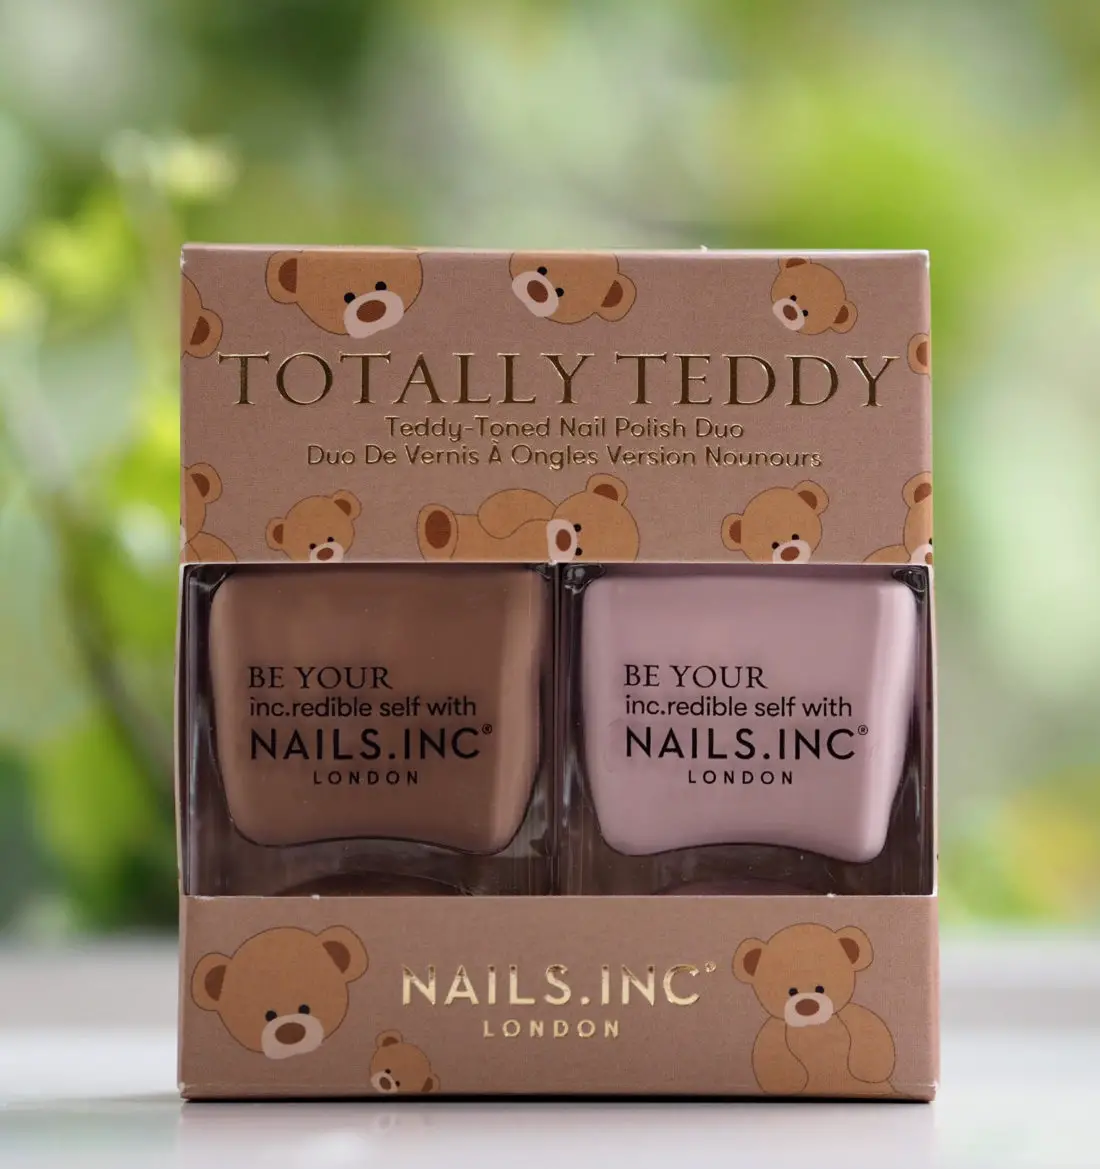 Nails Inc Totally Teddy